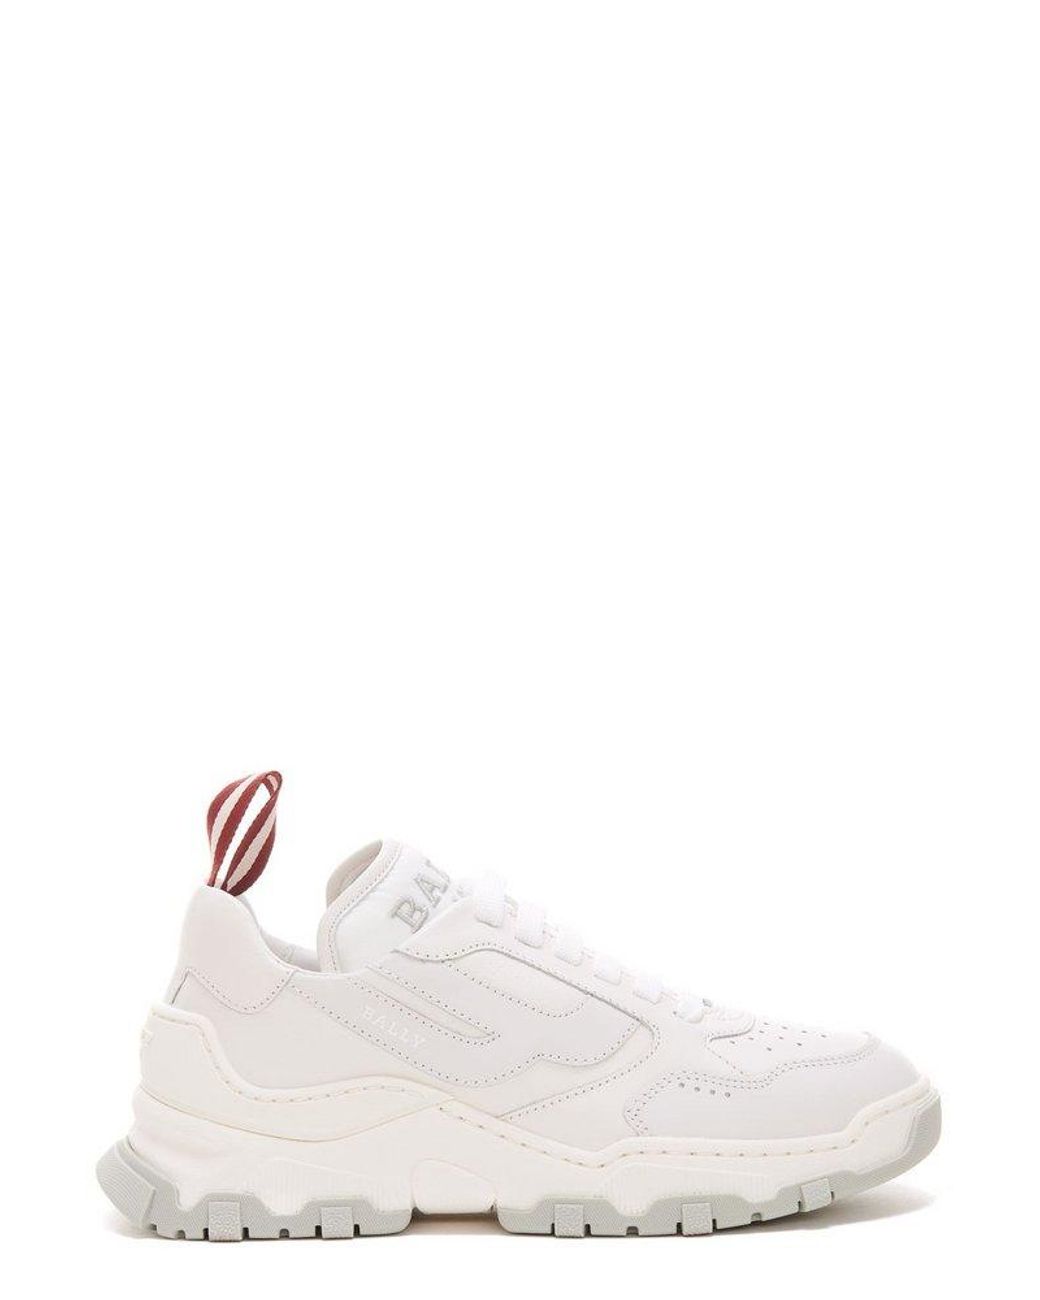 Bally Holden Low-top Sneakers in White | Lyst